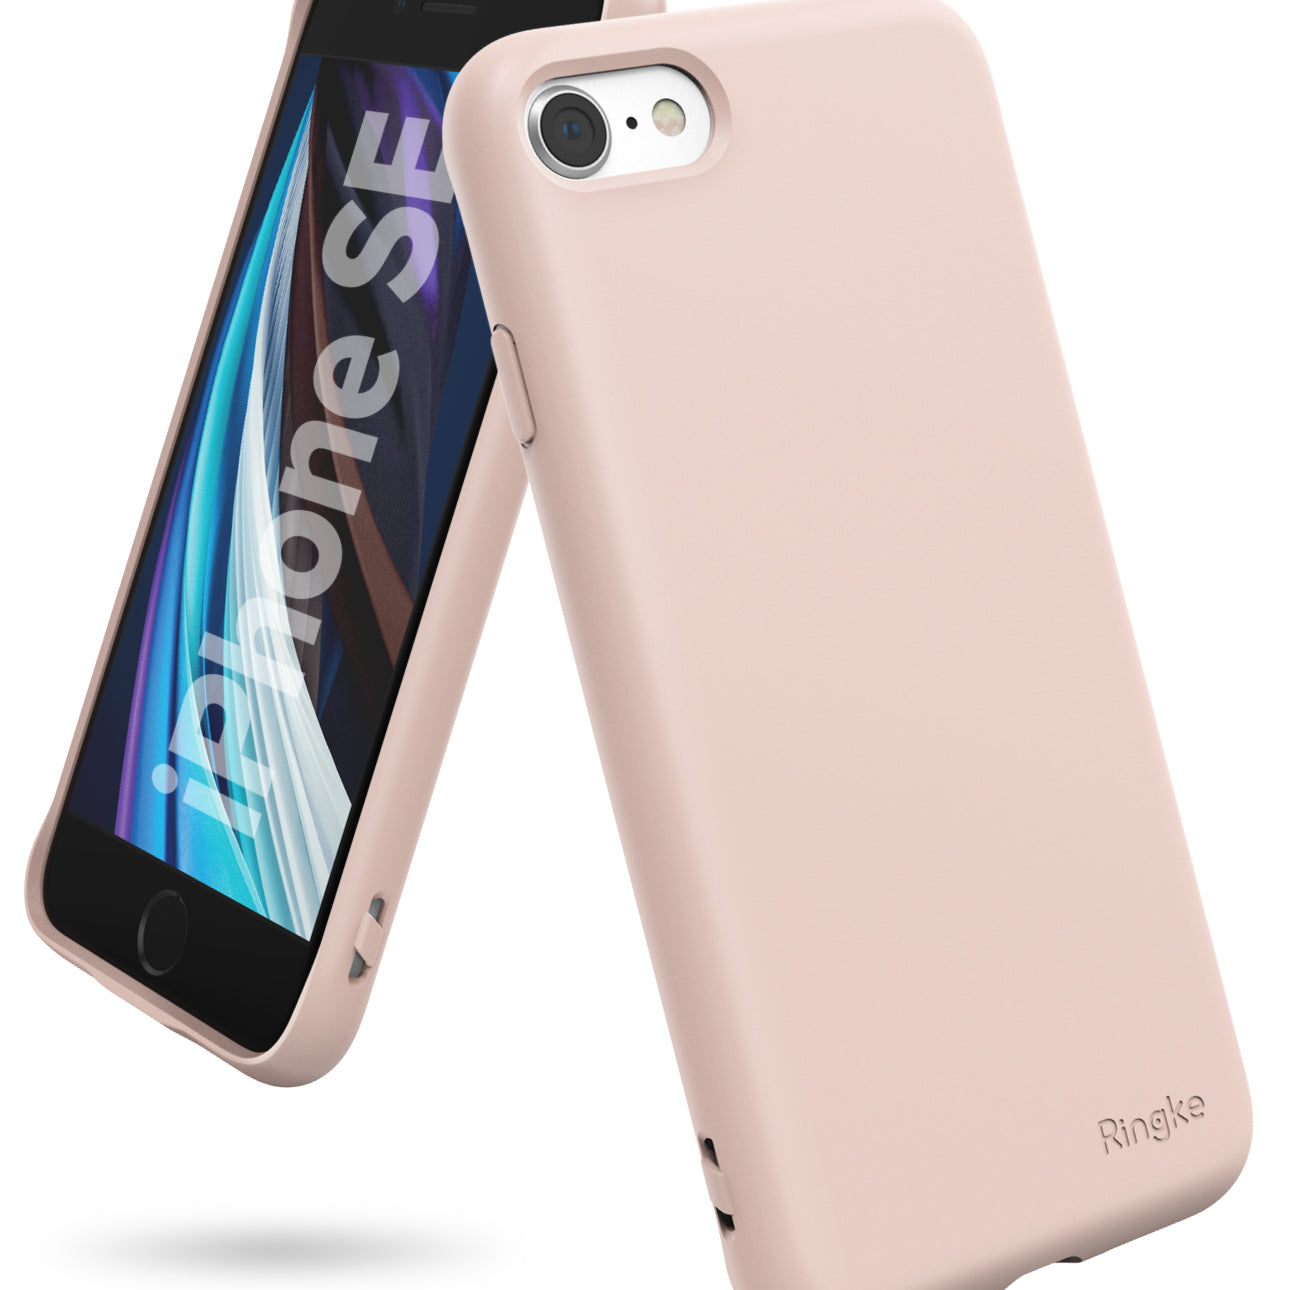 ringke air-s case designed for apple iphone se 2020 / iphone 8 / iphone 7 - pink sand